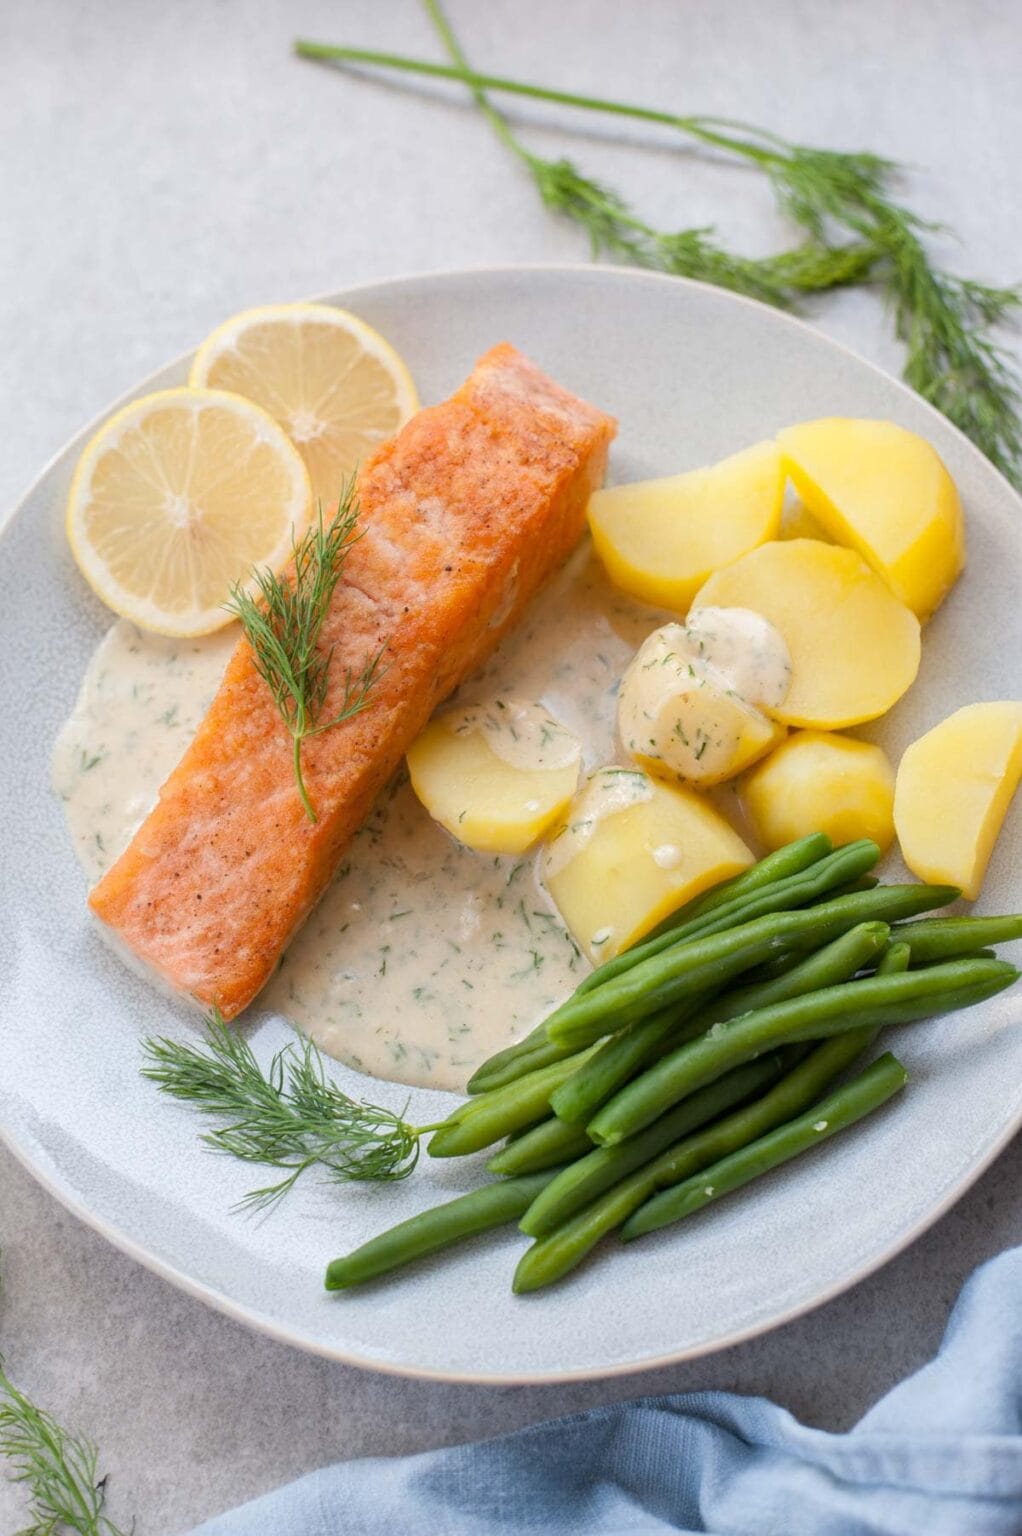 Salmon with creamy dill sauce - Everyday Delicious